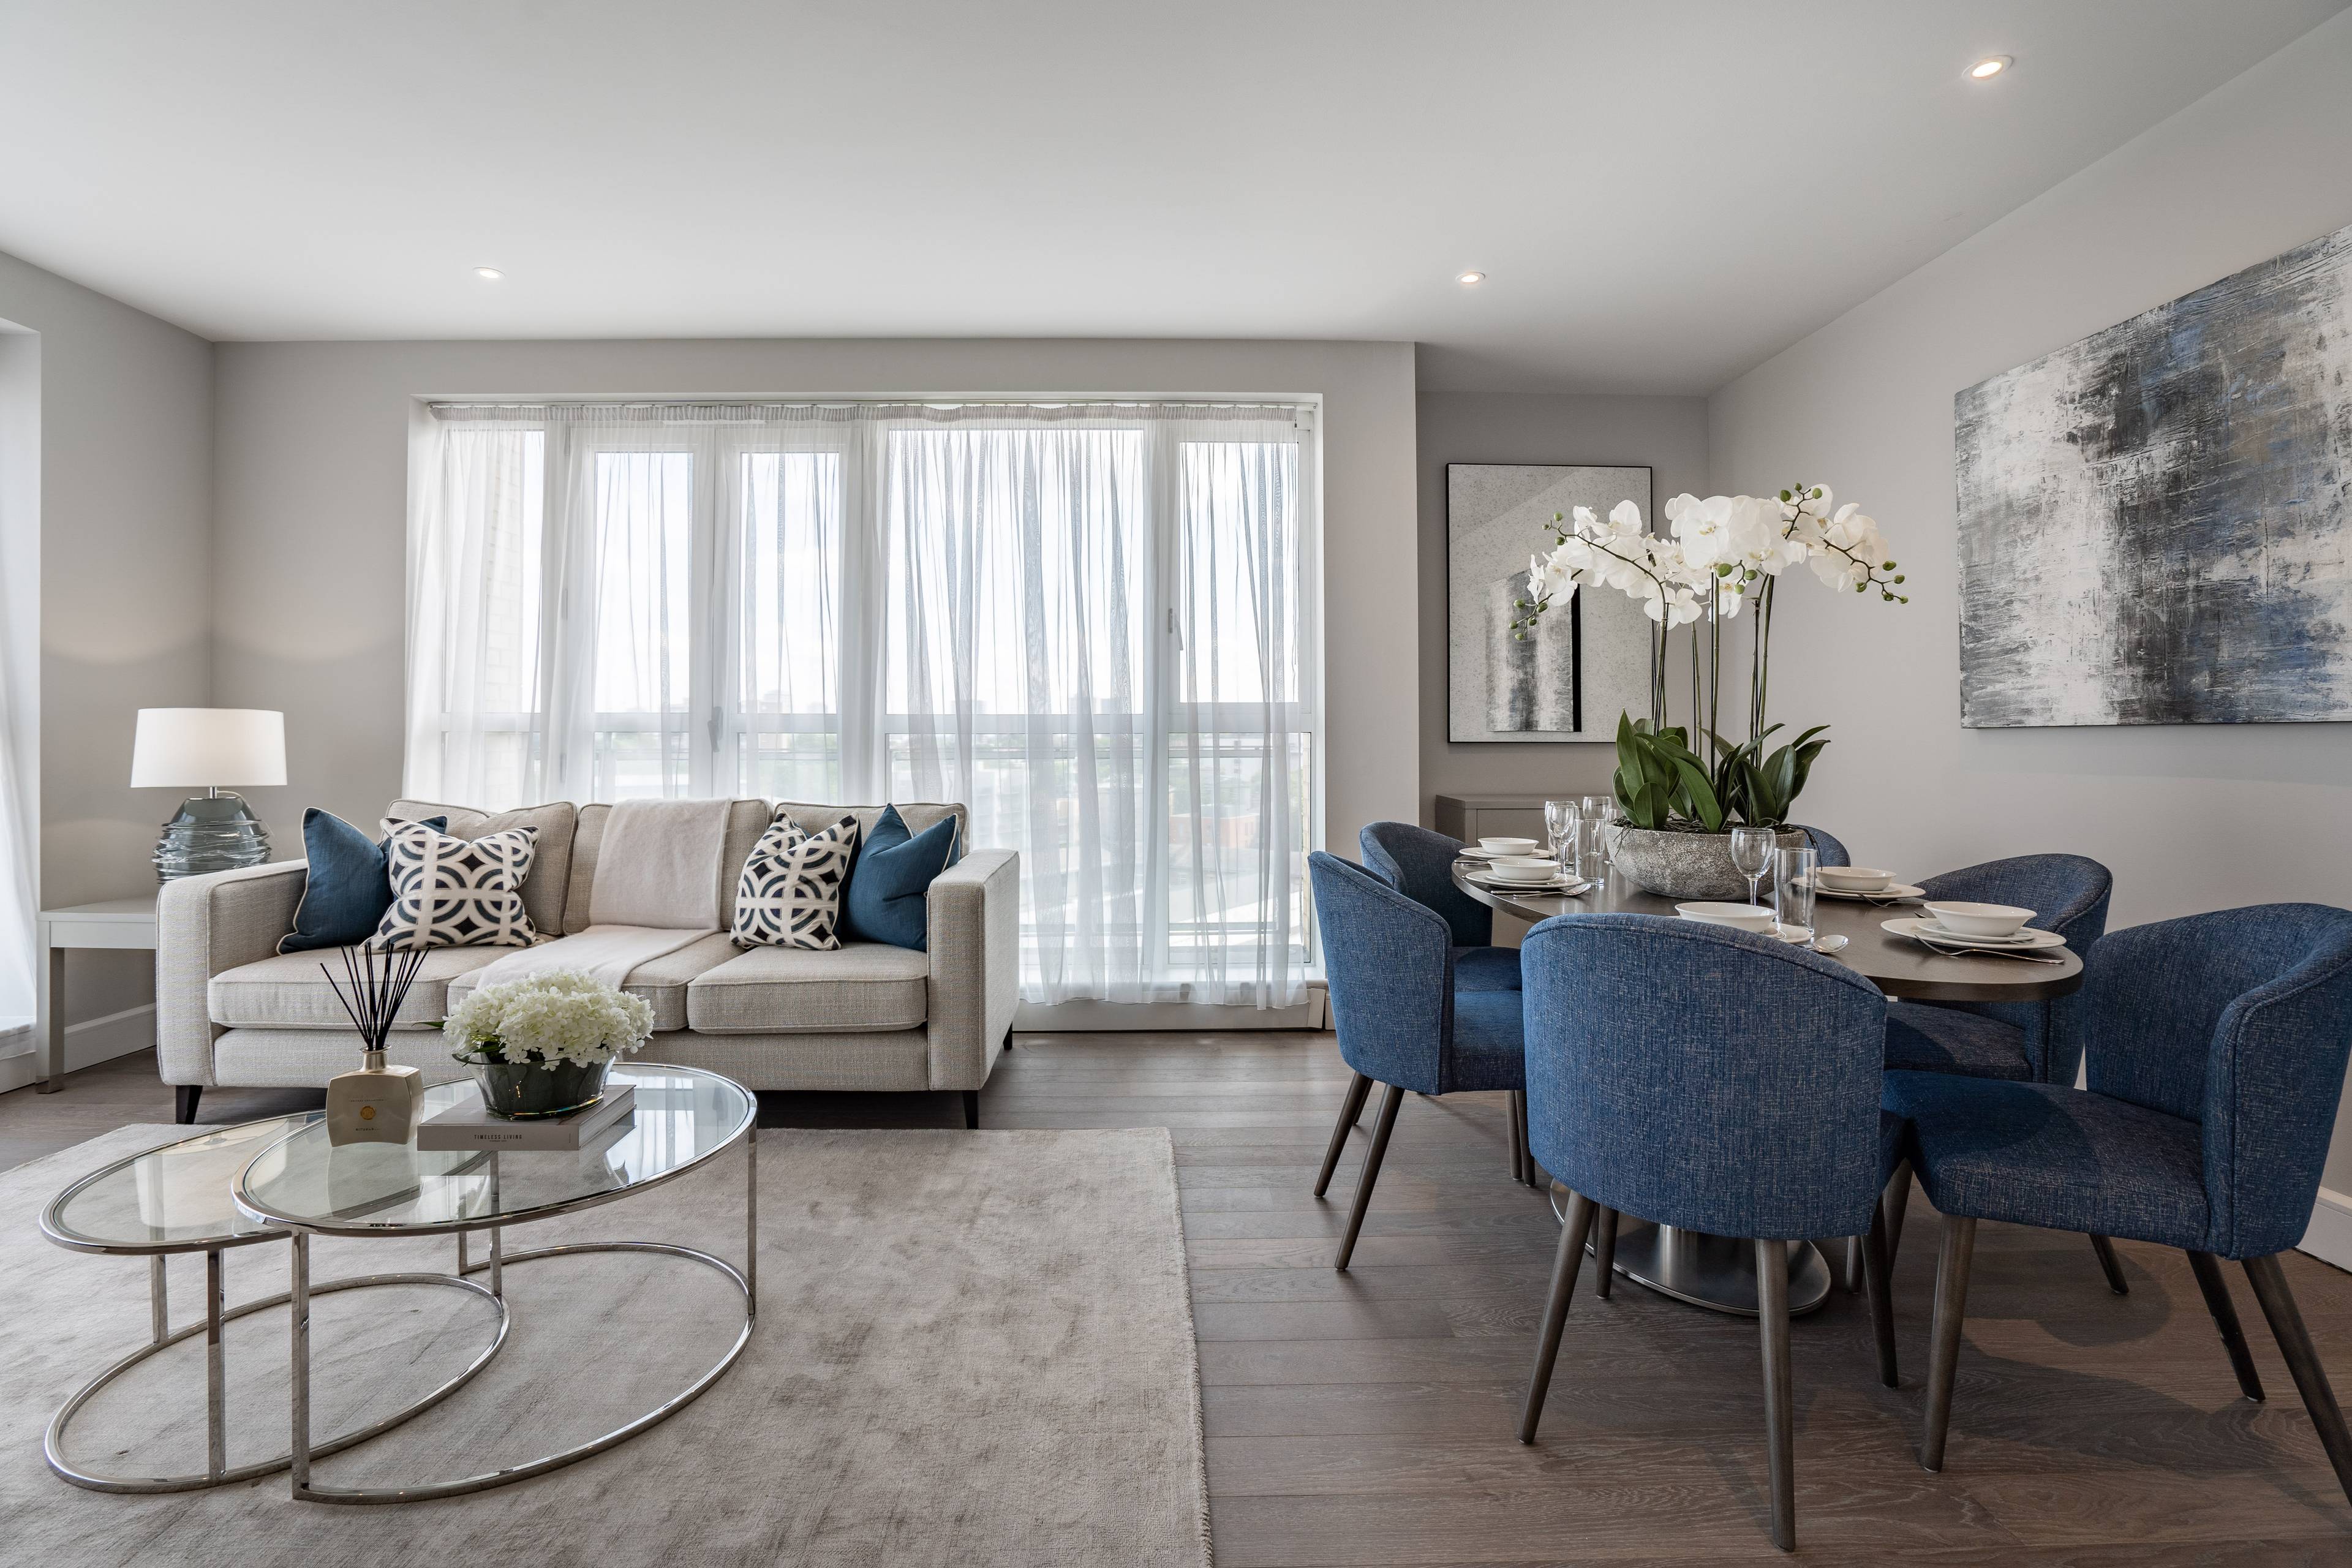 This luxurious interior designed two-bedroom, two bathroom apartment on the tenth-floor of this waterfront estate is set over 947 SqFt. A spacious apartment with modern open-plan living space, and dedicated dining area in the reception room.